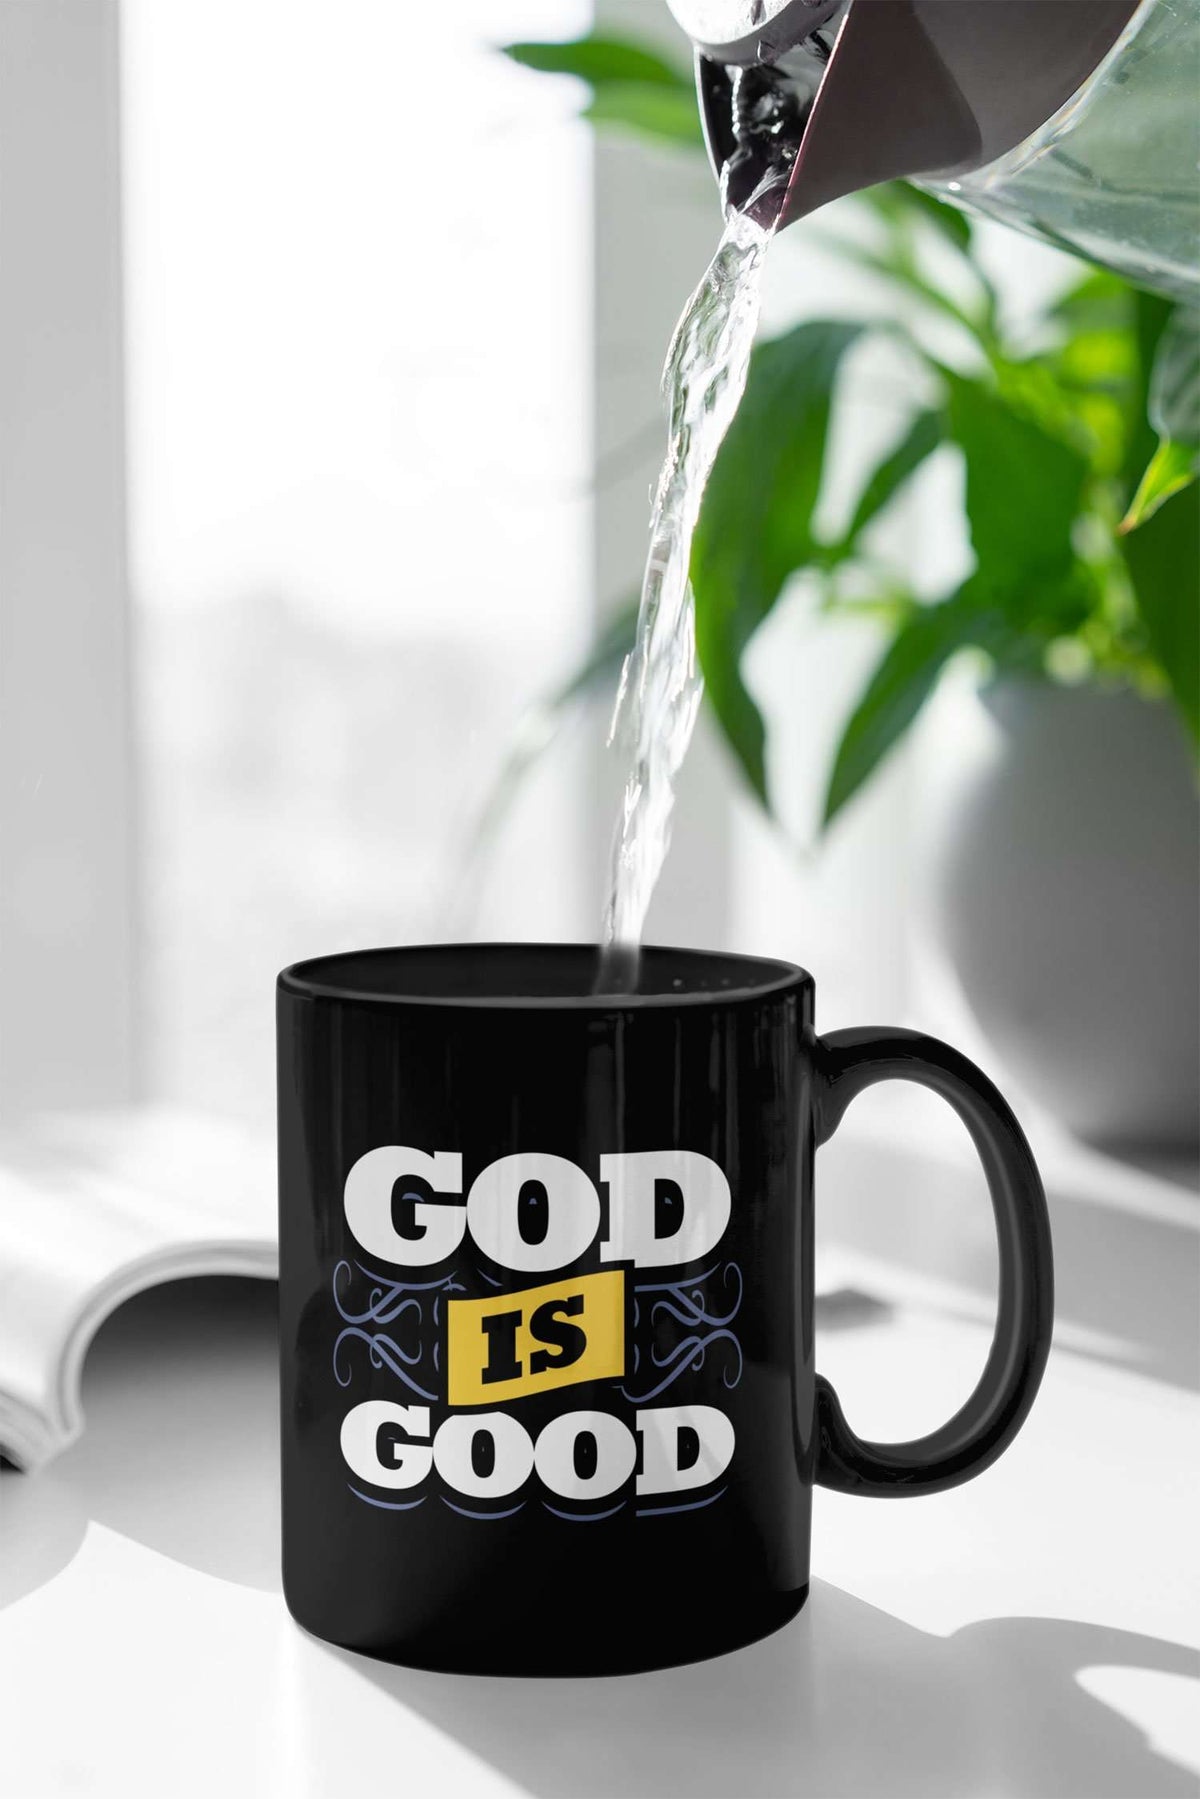 Designs by MyUtopia Shout Out:God Is Good Ceramic Coffee Mug - Black,11 oz / Black,Ceramic Coffee Mug